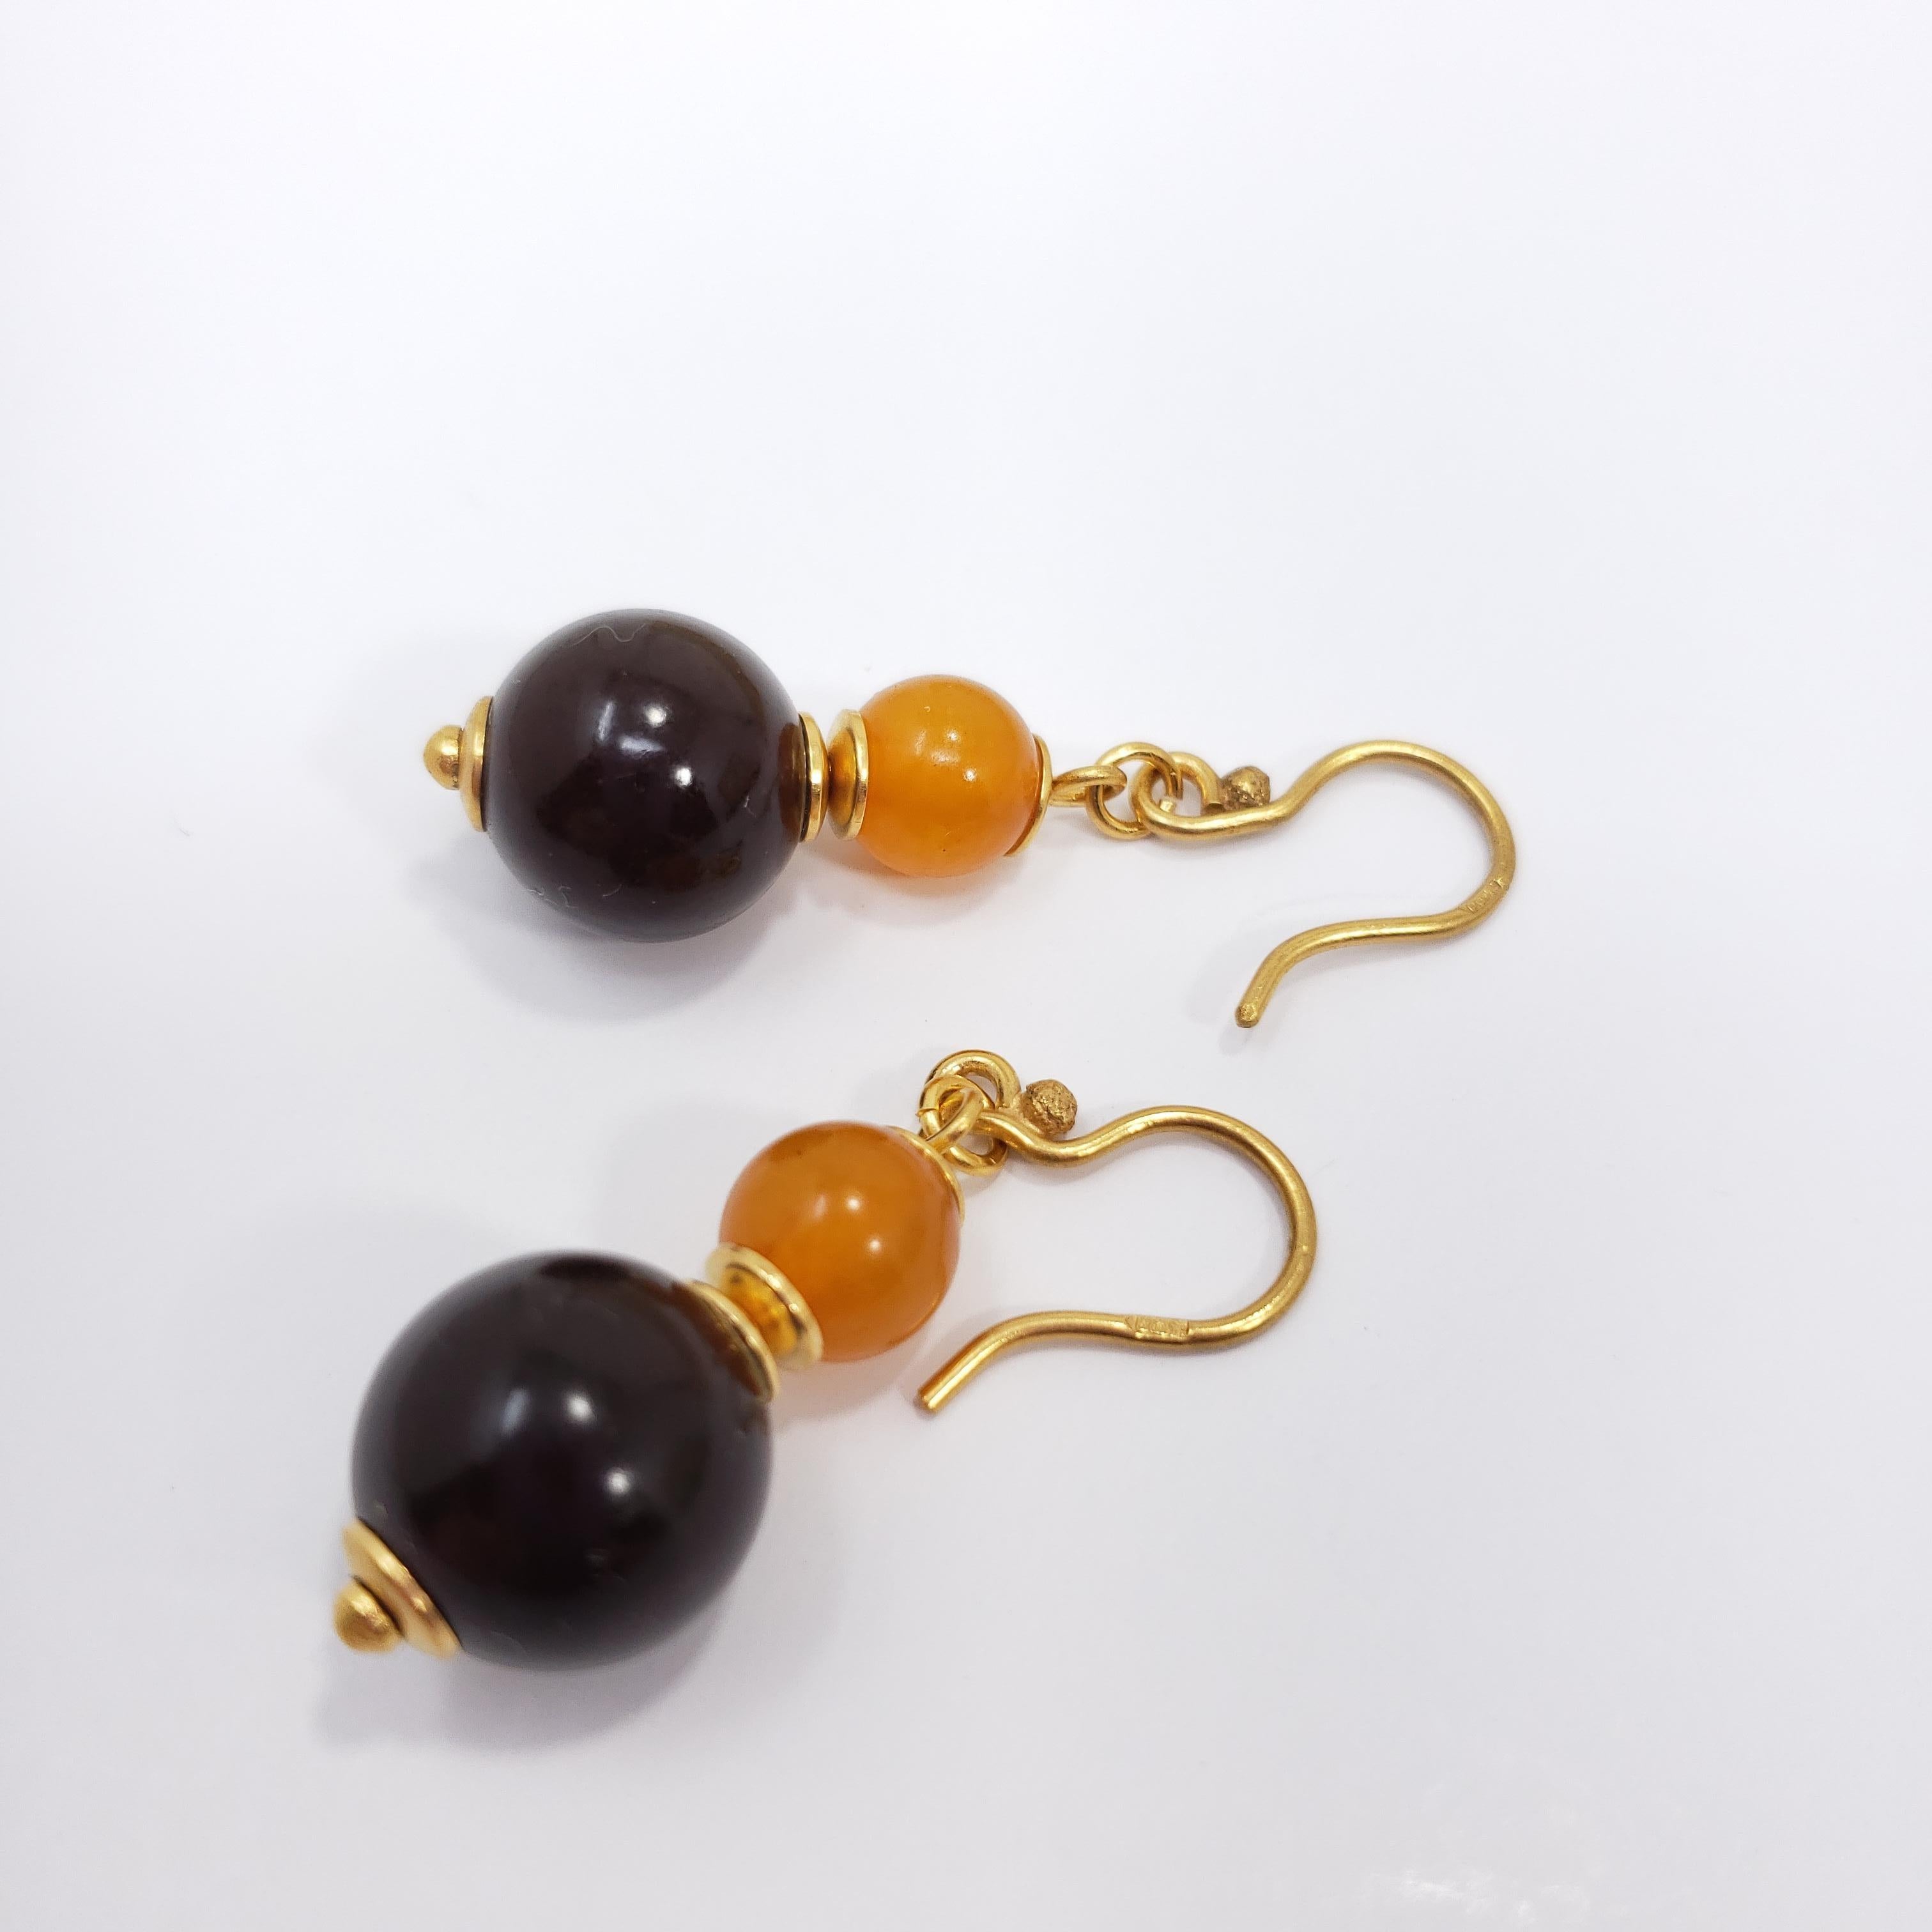 A pair of exquisite Russian earrings. Each earring features two Baltic amber beads in a rich orange and brown colors, accented with goldtone accents and hooks. Stylish!

Hallmarks: Cyrillic markings
Amber beads approx 8mm in diameter